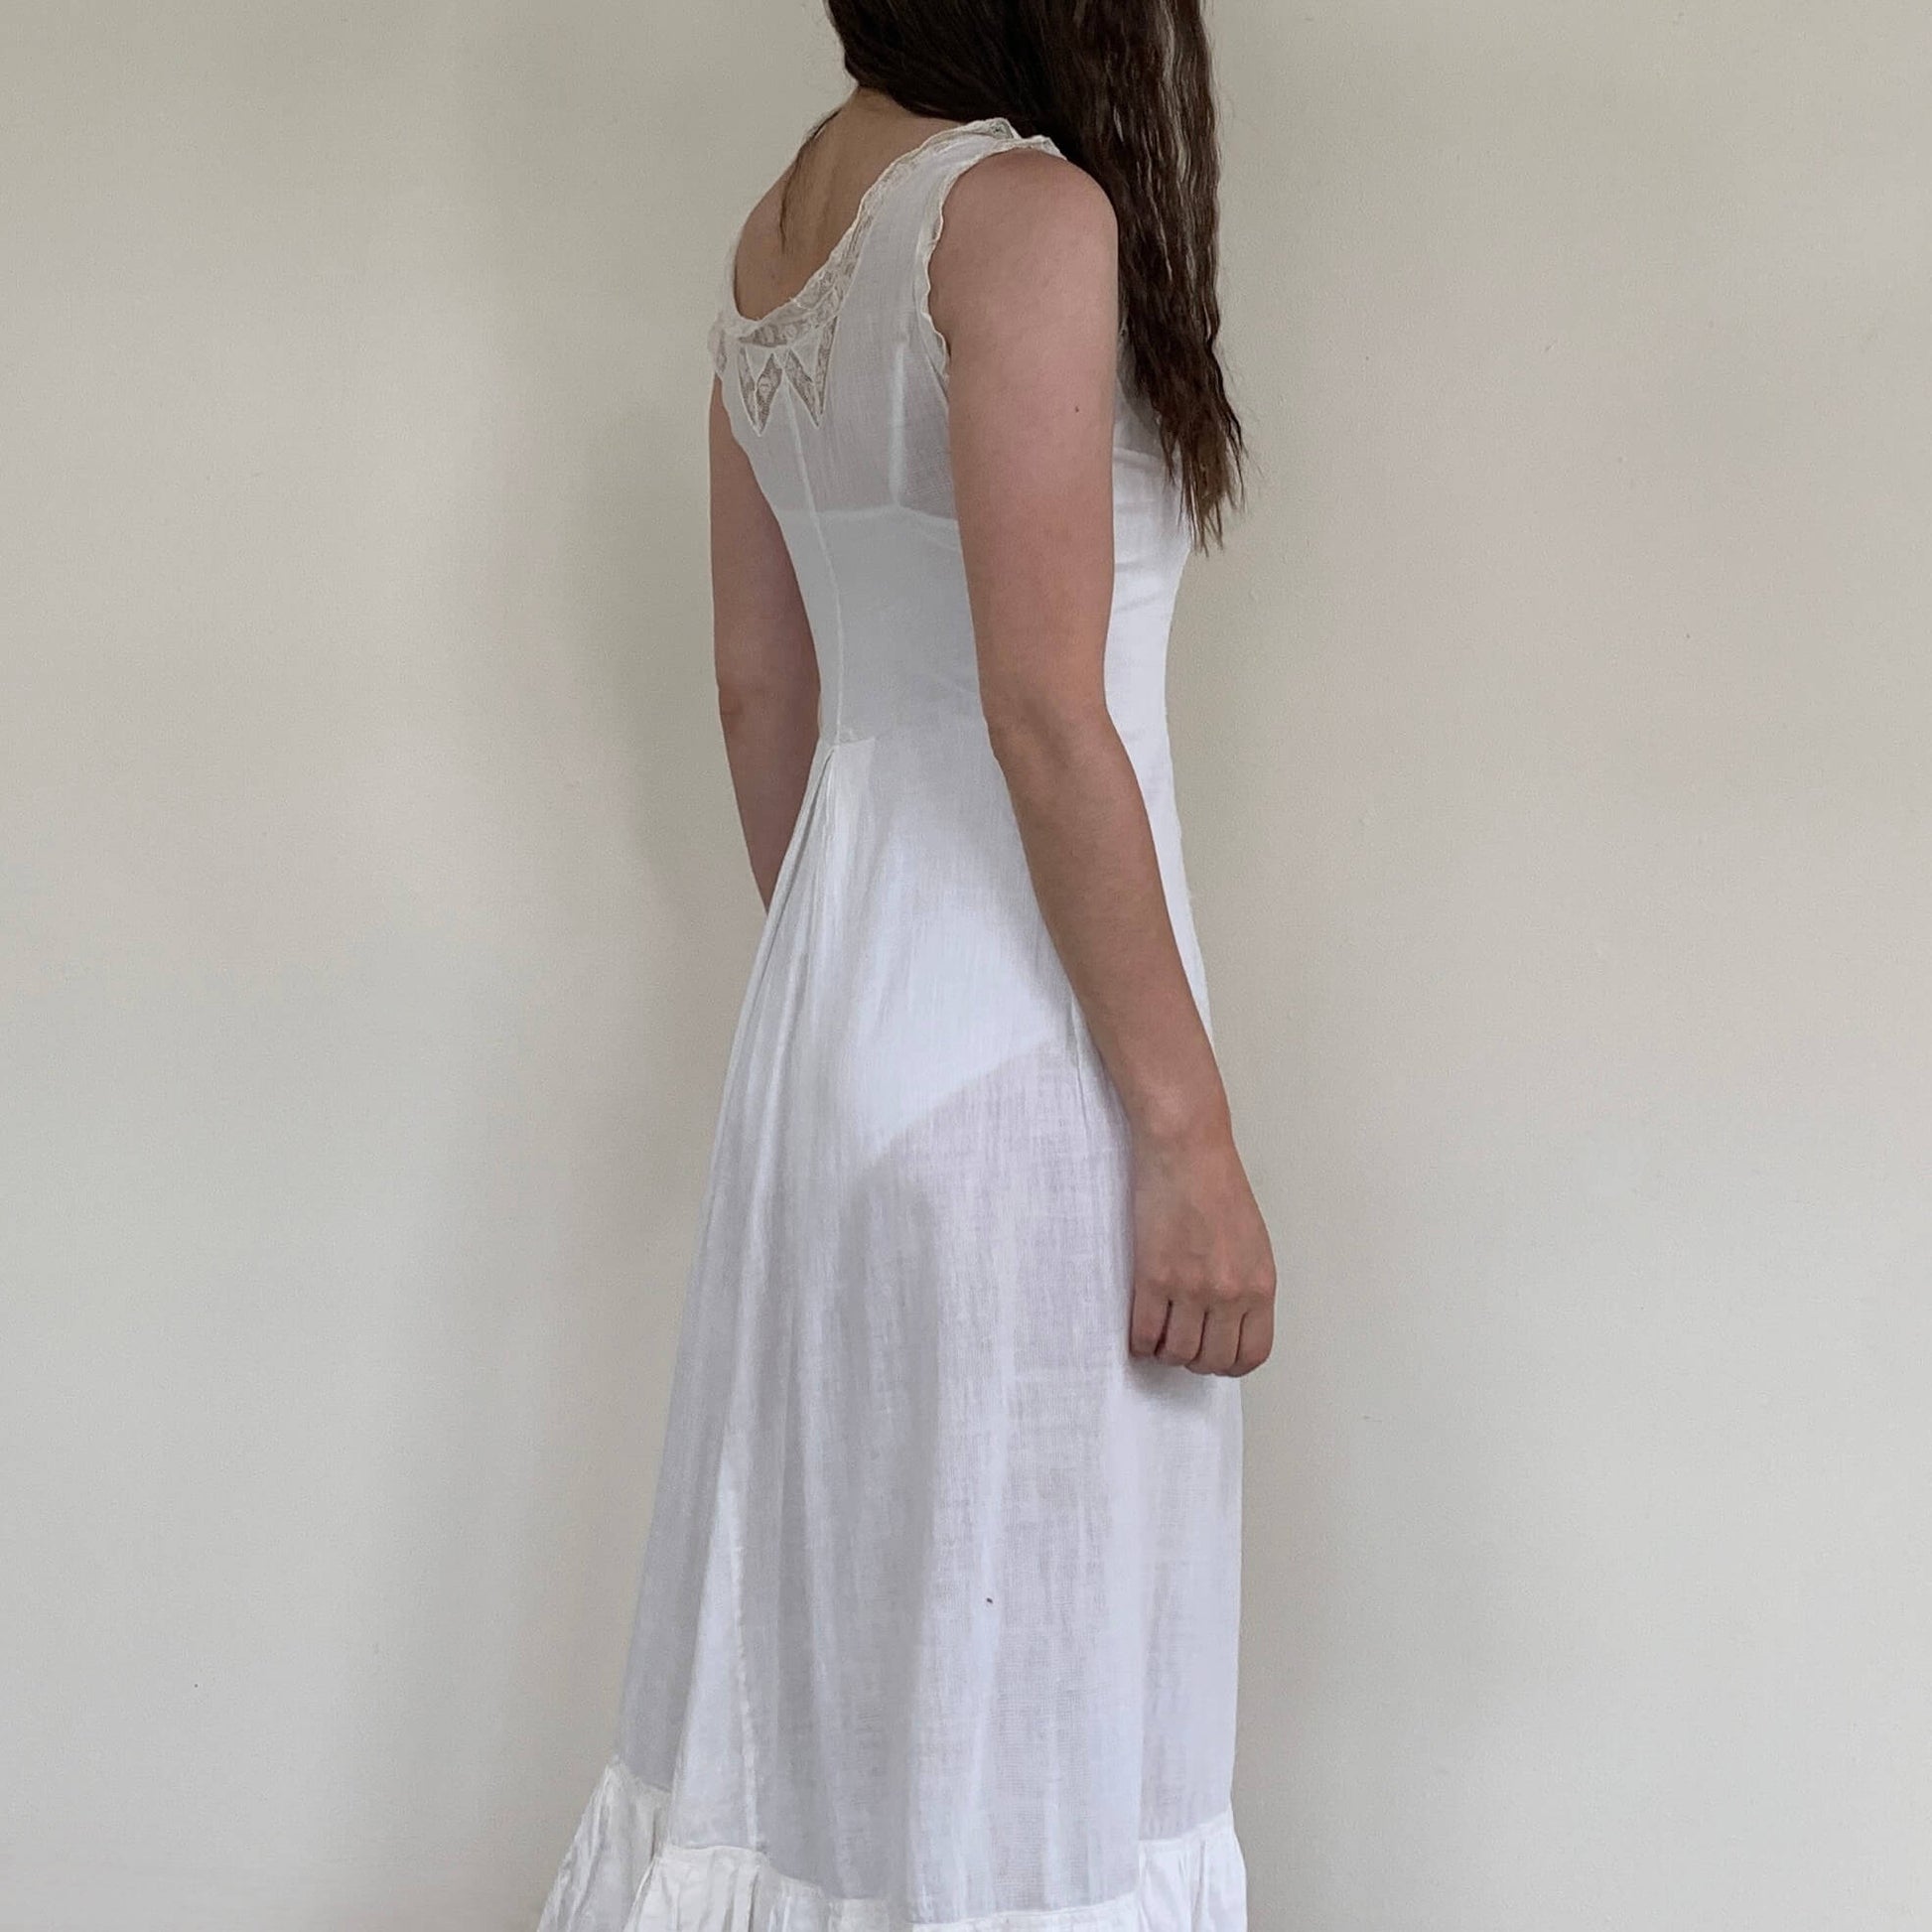 woman wearing a white dress turned to the side